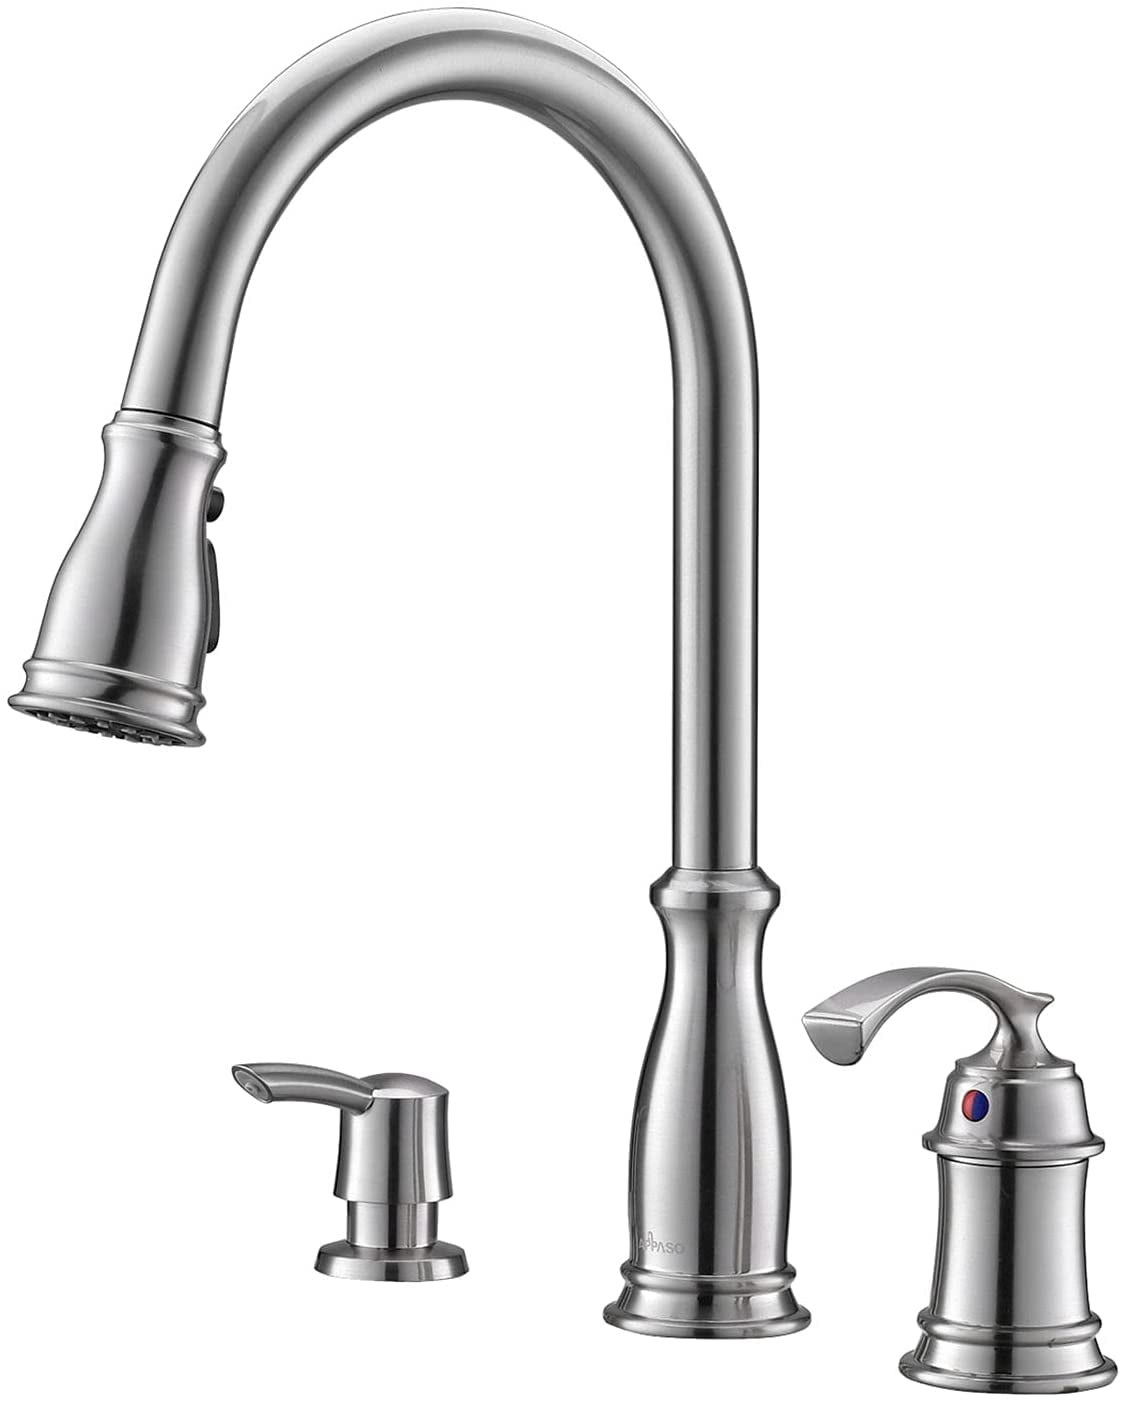 Brushed Nickel Kitchen Sink Faucet 3 Holes 1-Handle Pull Down W/ Soap Dispenser 